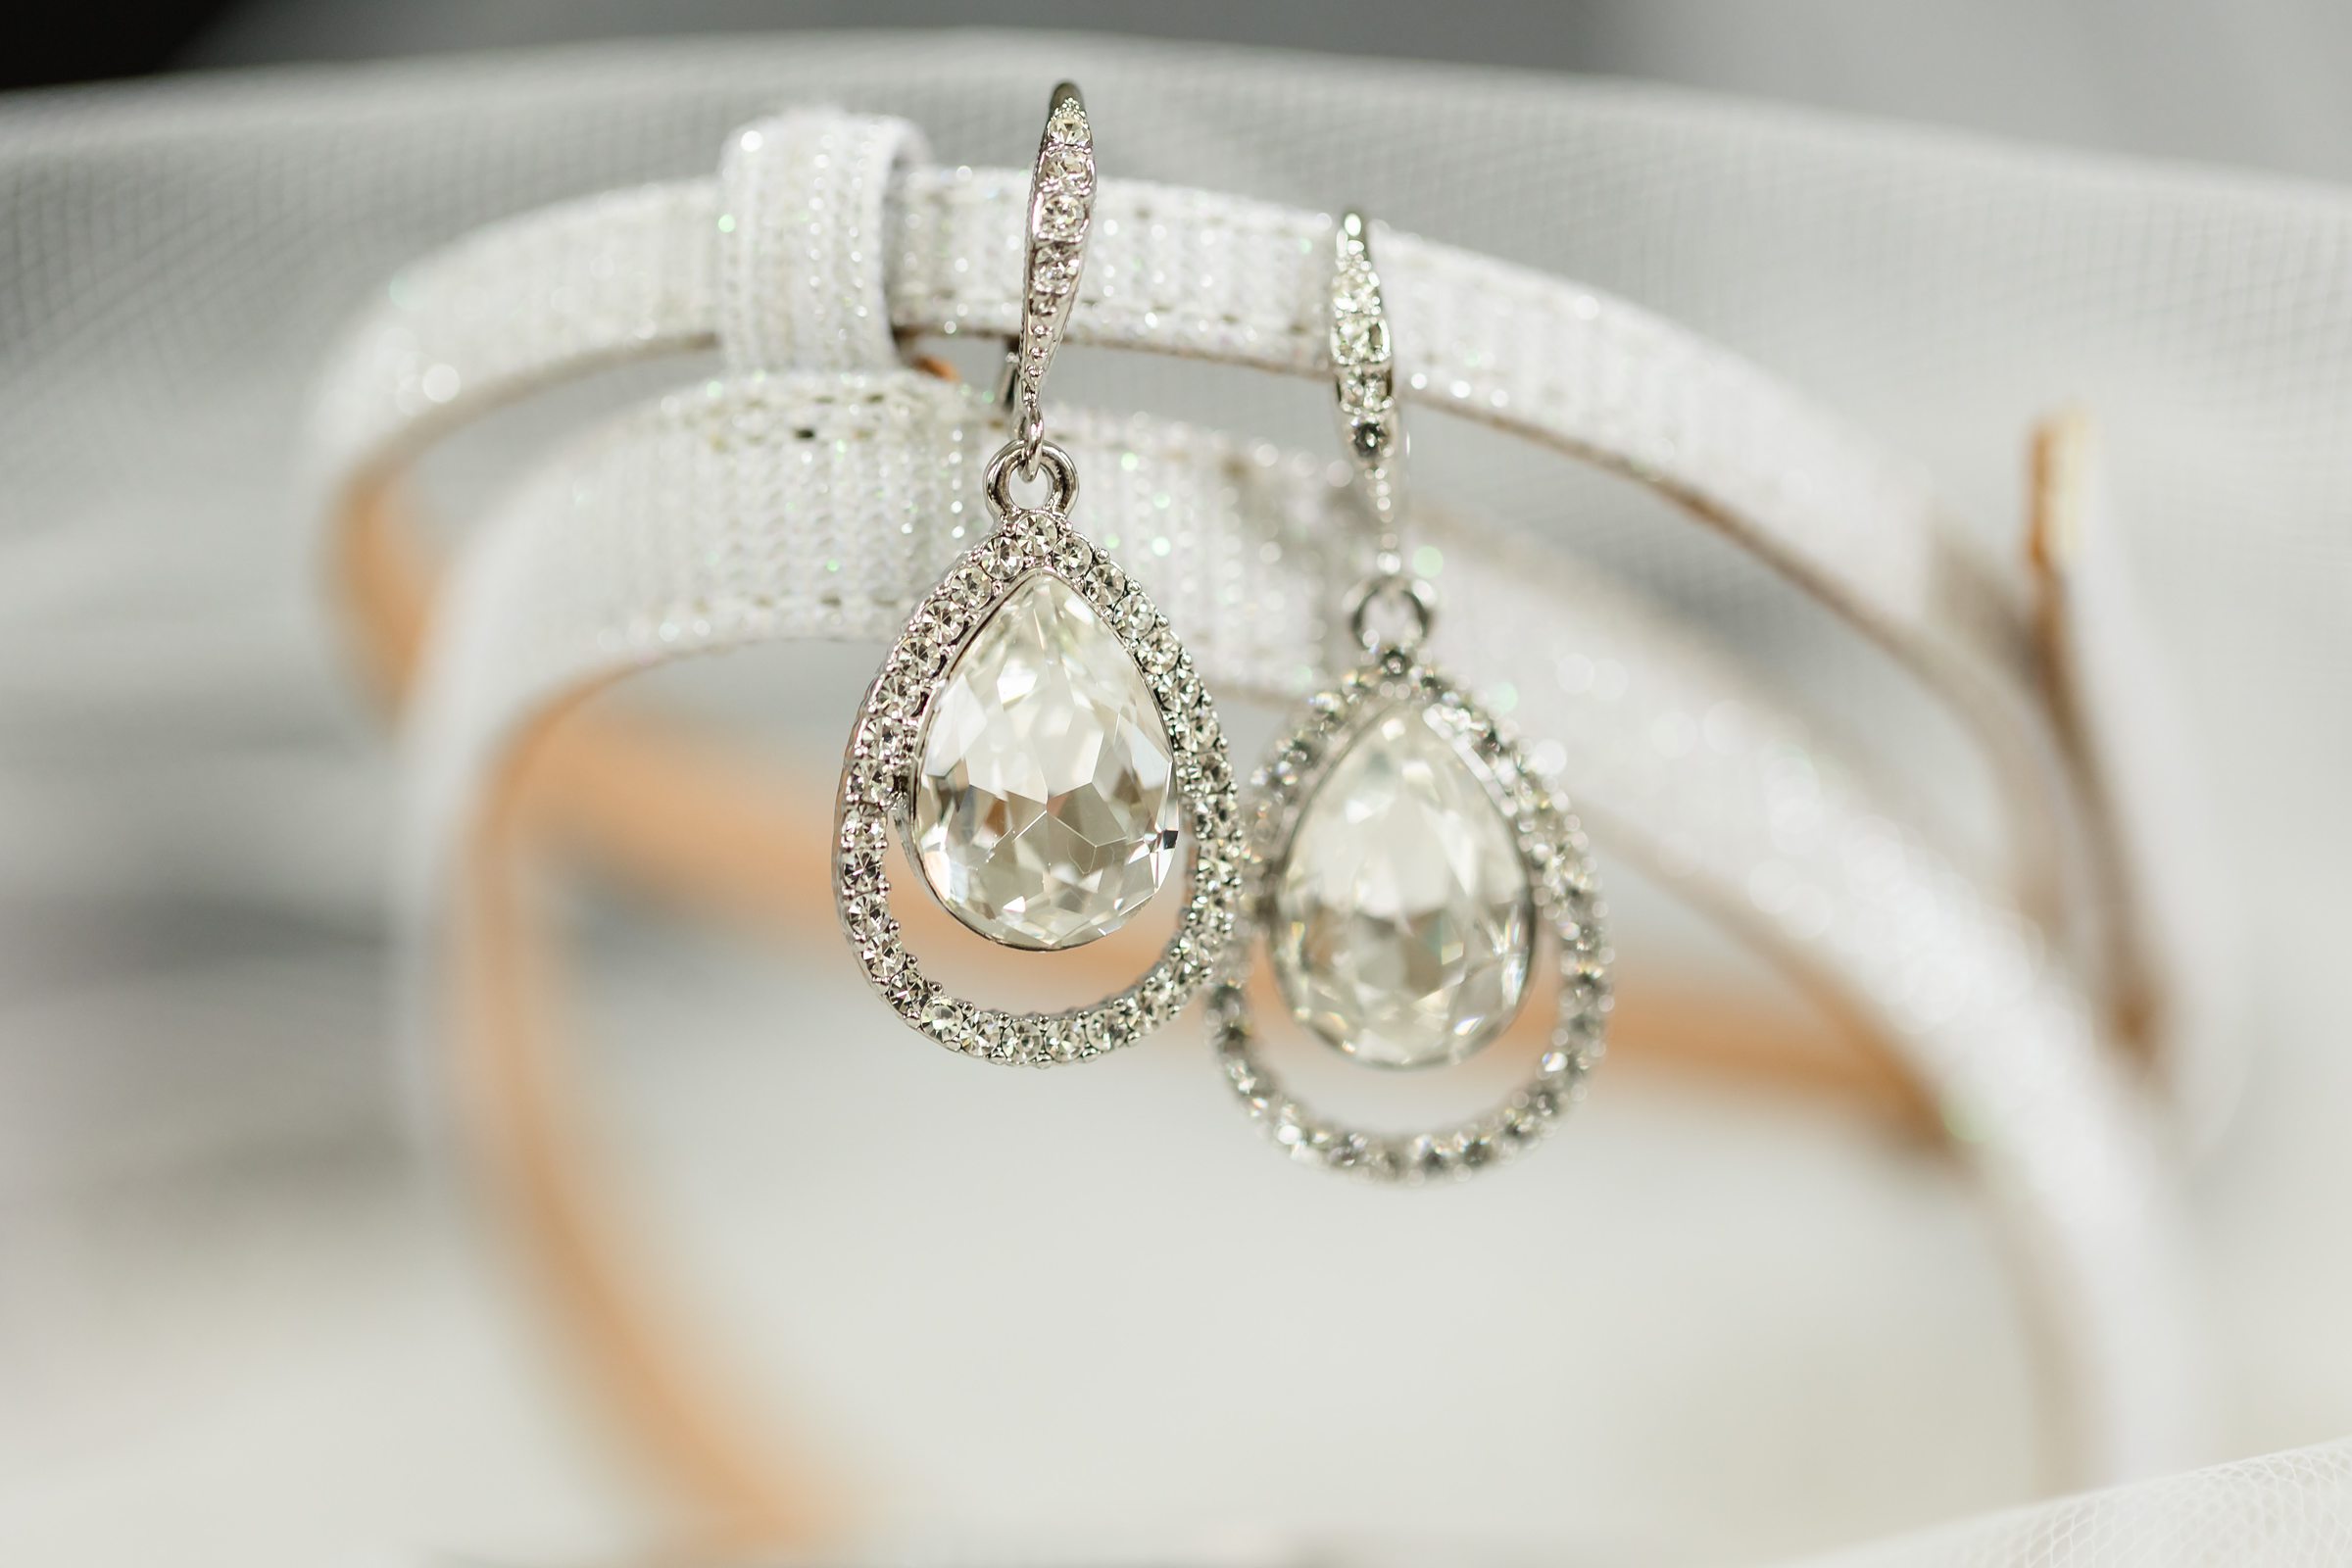 Bride's ear rings during a wedding at the Chevy Chase Country Club in Wheeling, Illinois.